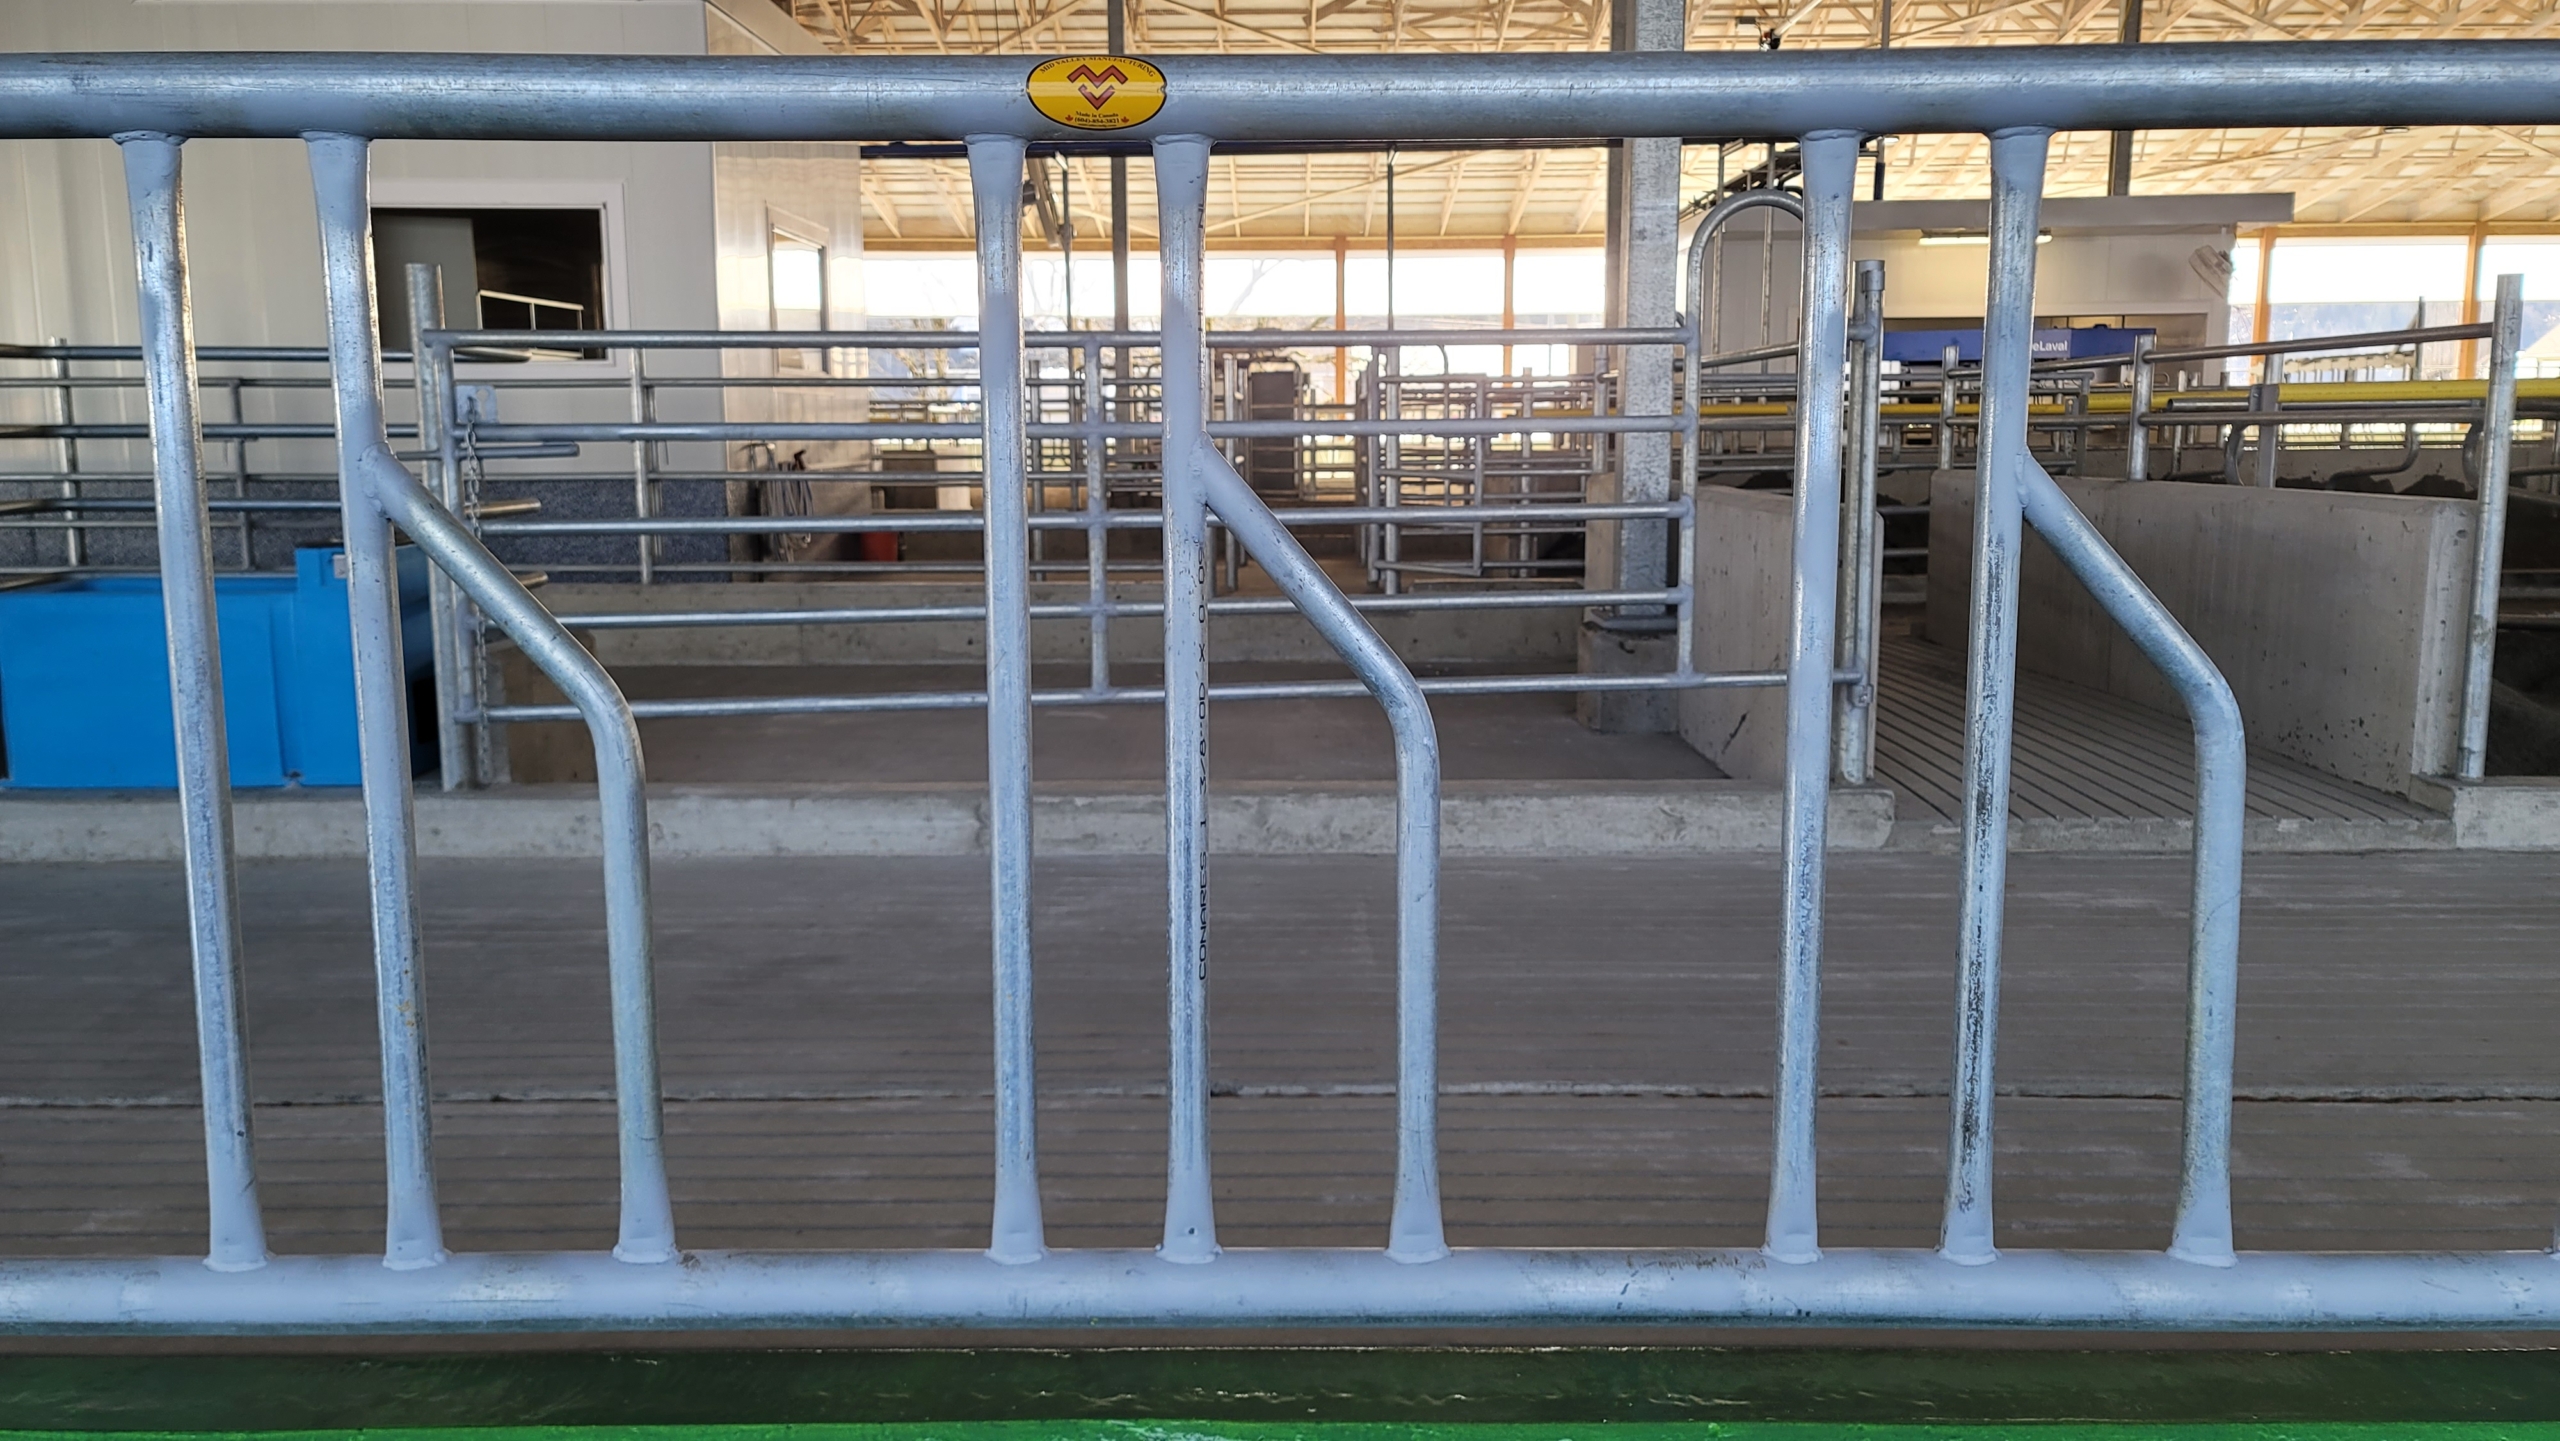 Looking at a water trough and cow crowd gate through metal cow stanchions.